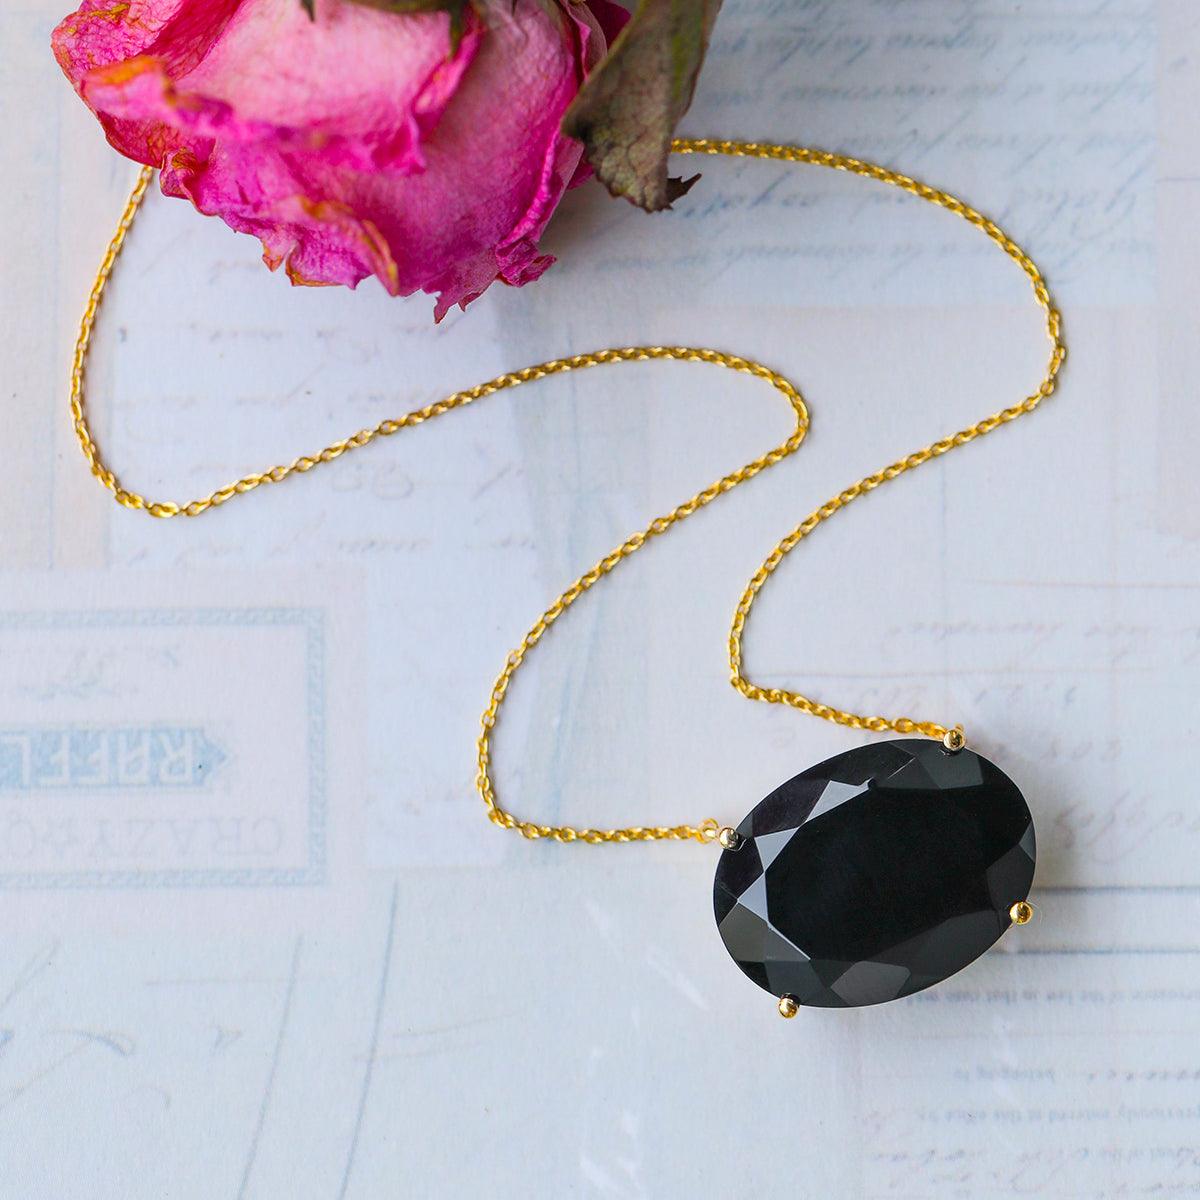 Black Onyx Necklace 14K Gold Plated 925 Silver Chain Pendant Necklace Jewelry - YoTreasure